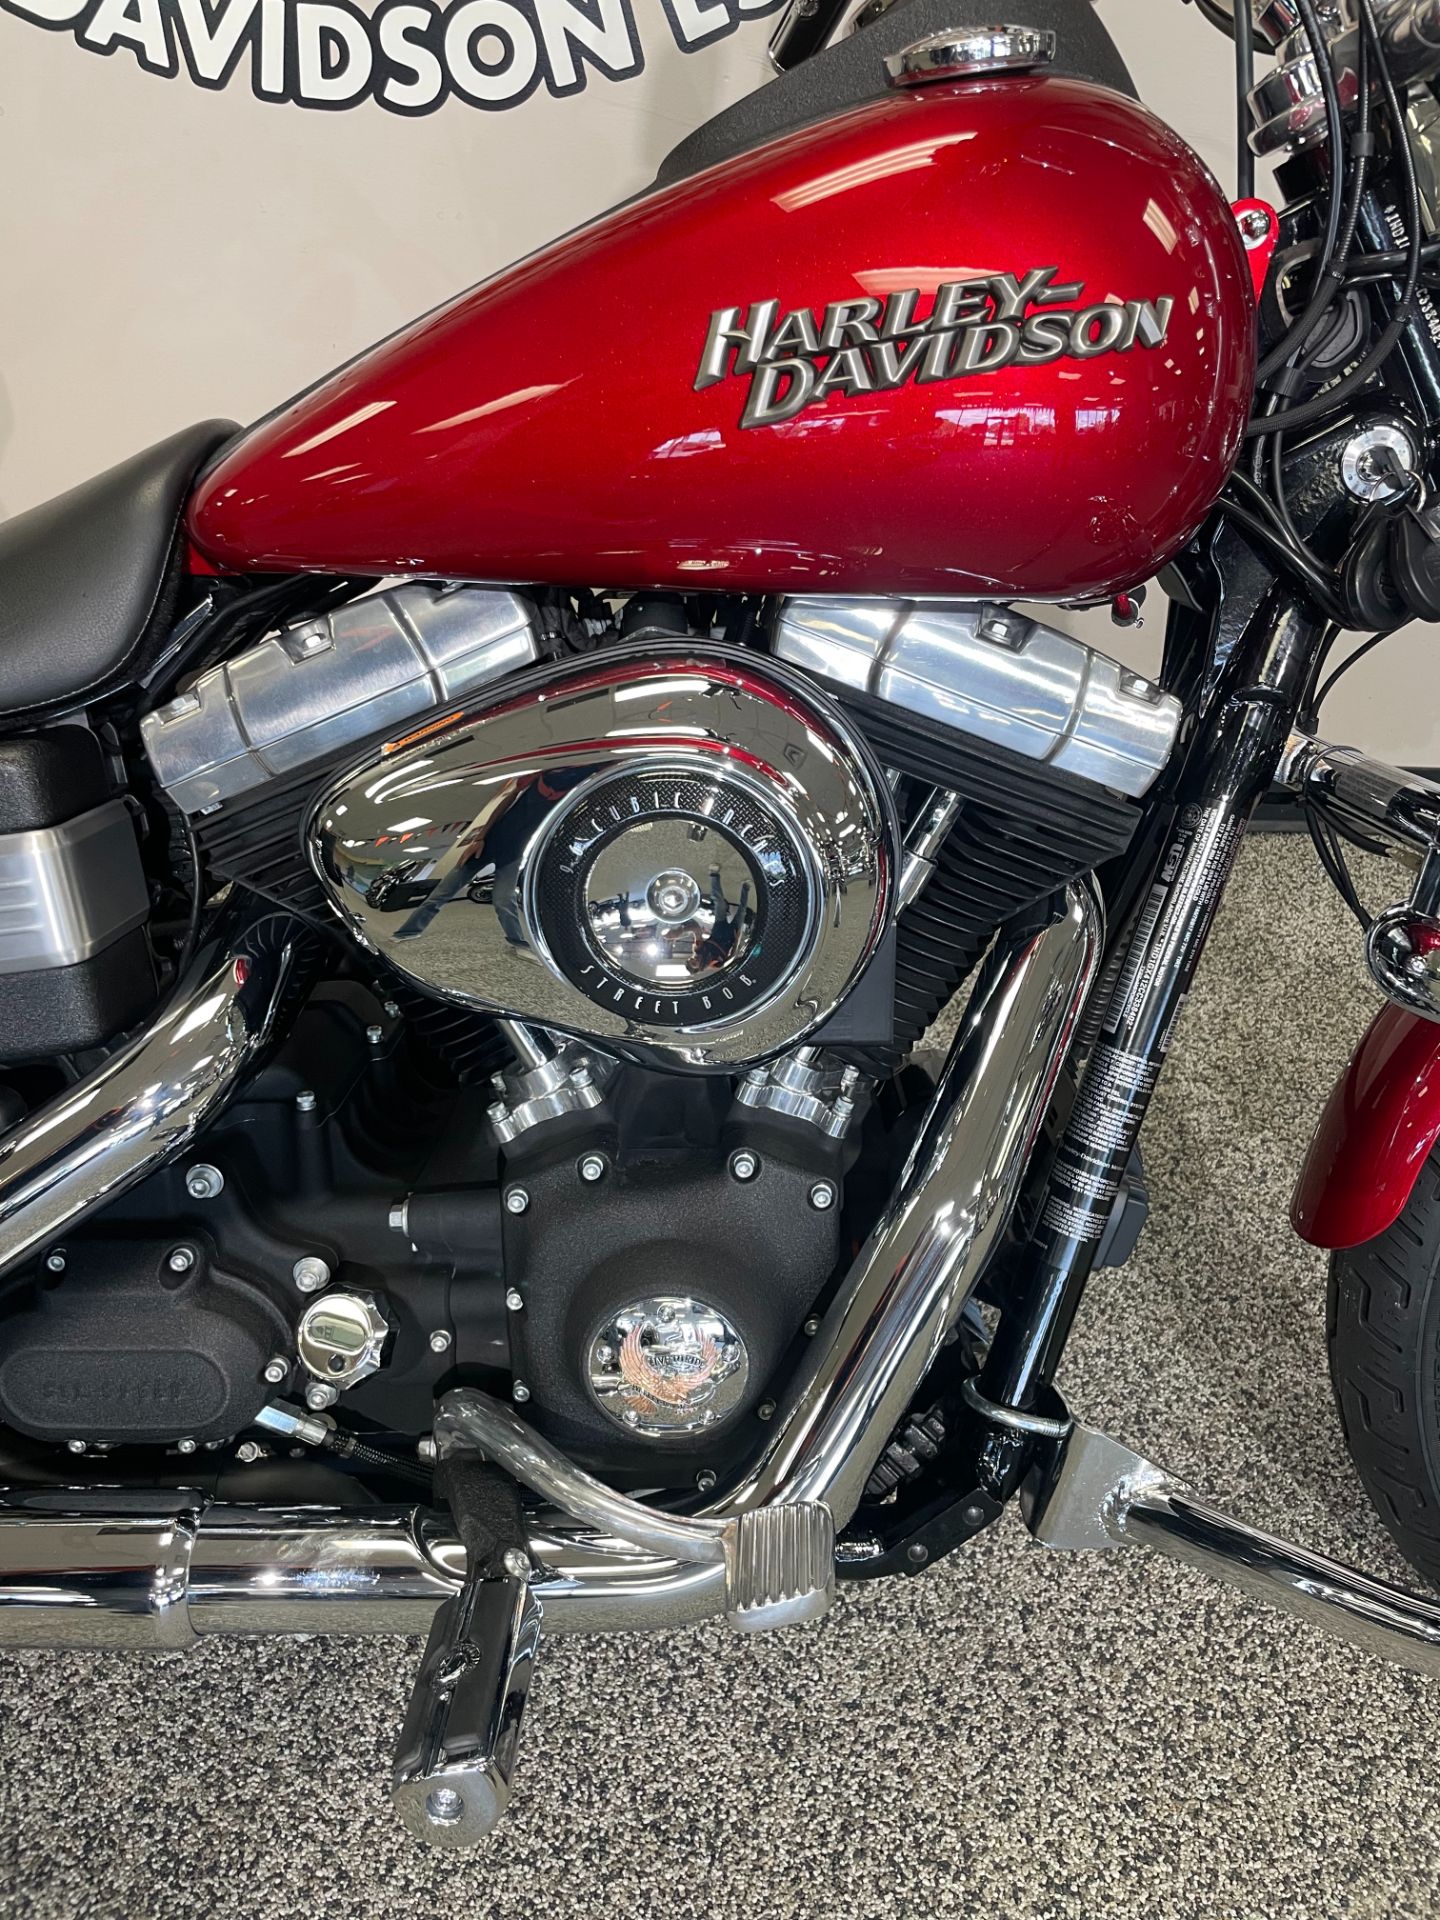 2012 Harley-Davidson DYNA STREET BOB in Knoxville, Tennessee - Photo 2